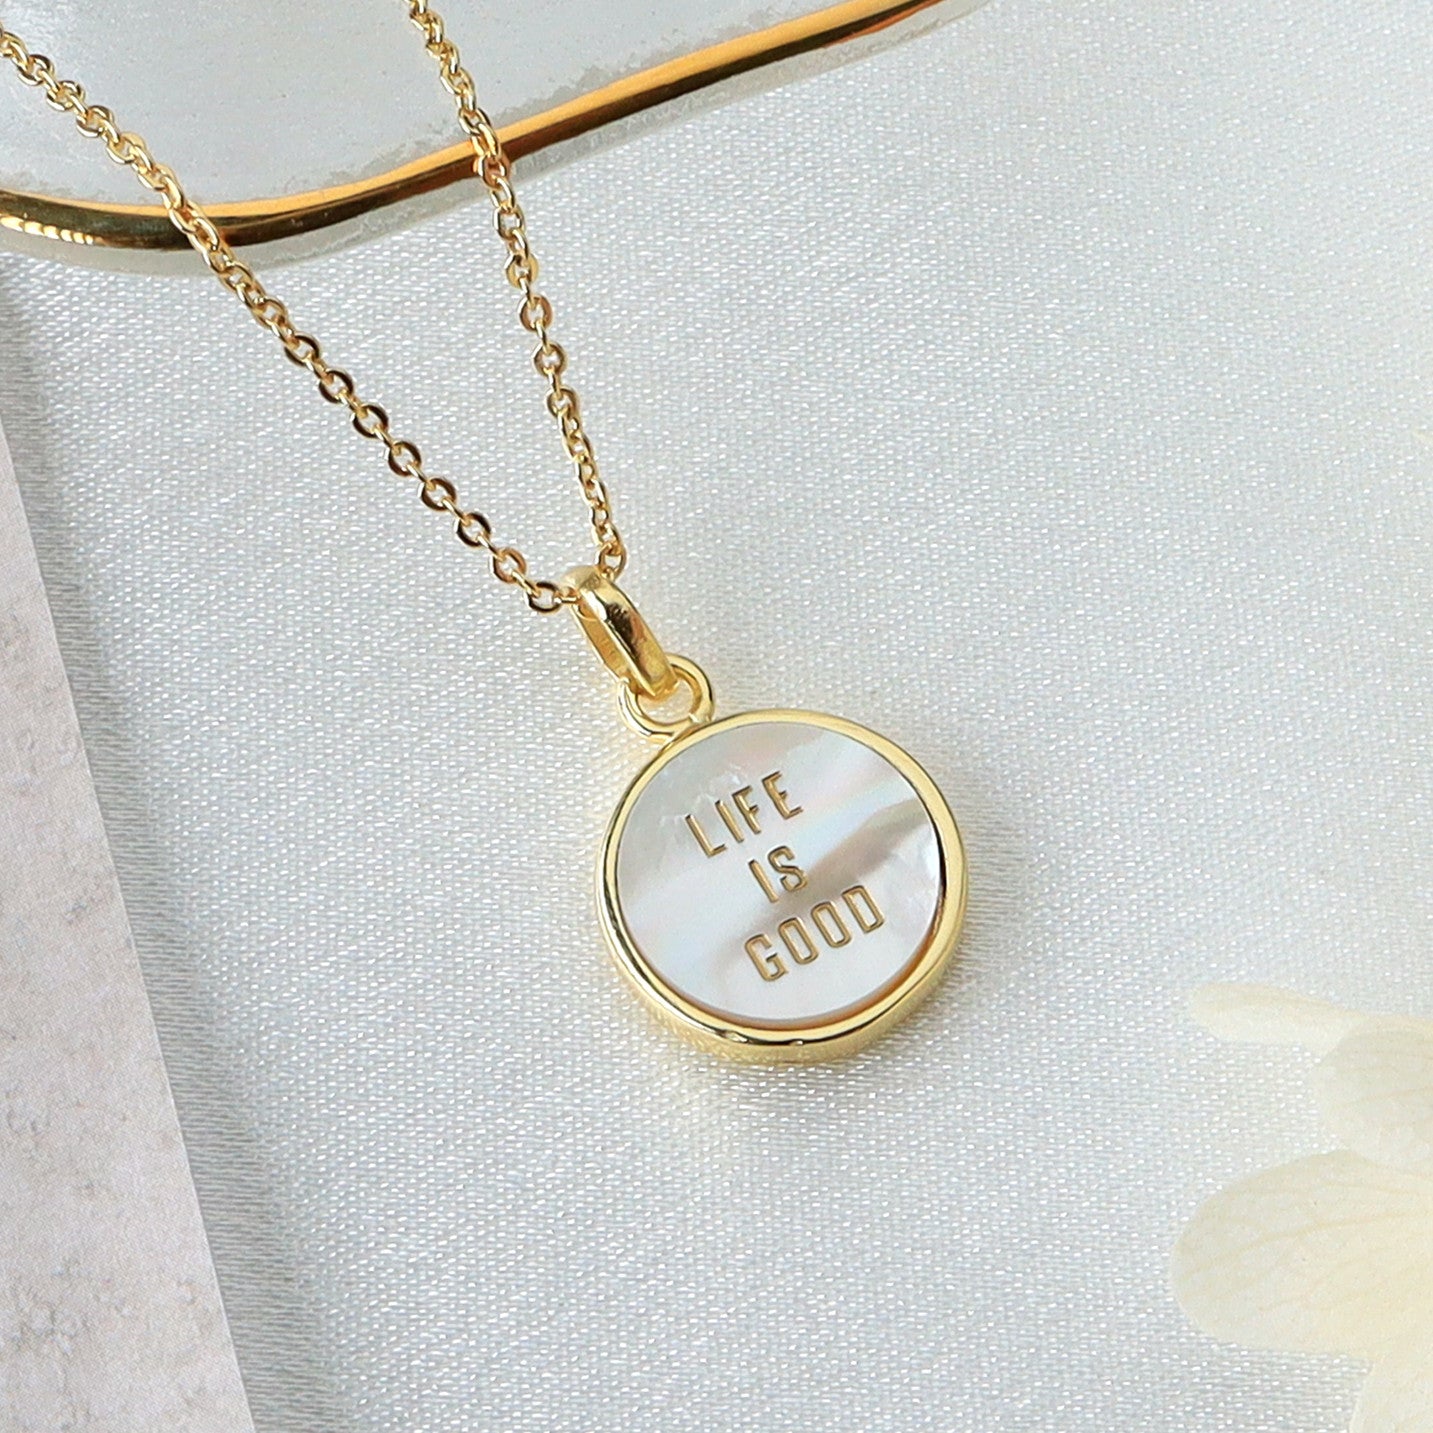 Gold Chain for Personalized Charms 16 / Gold